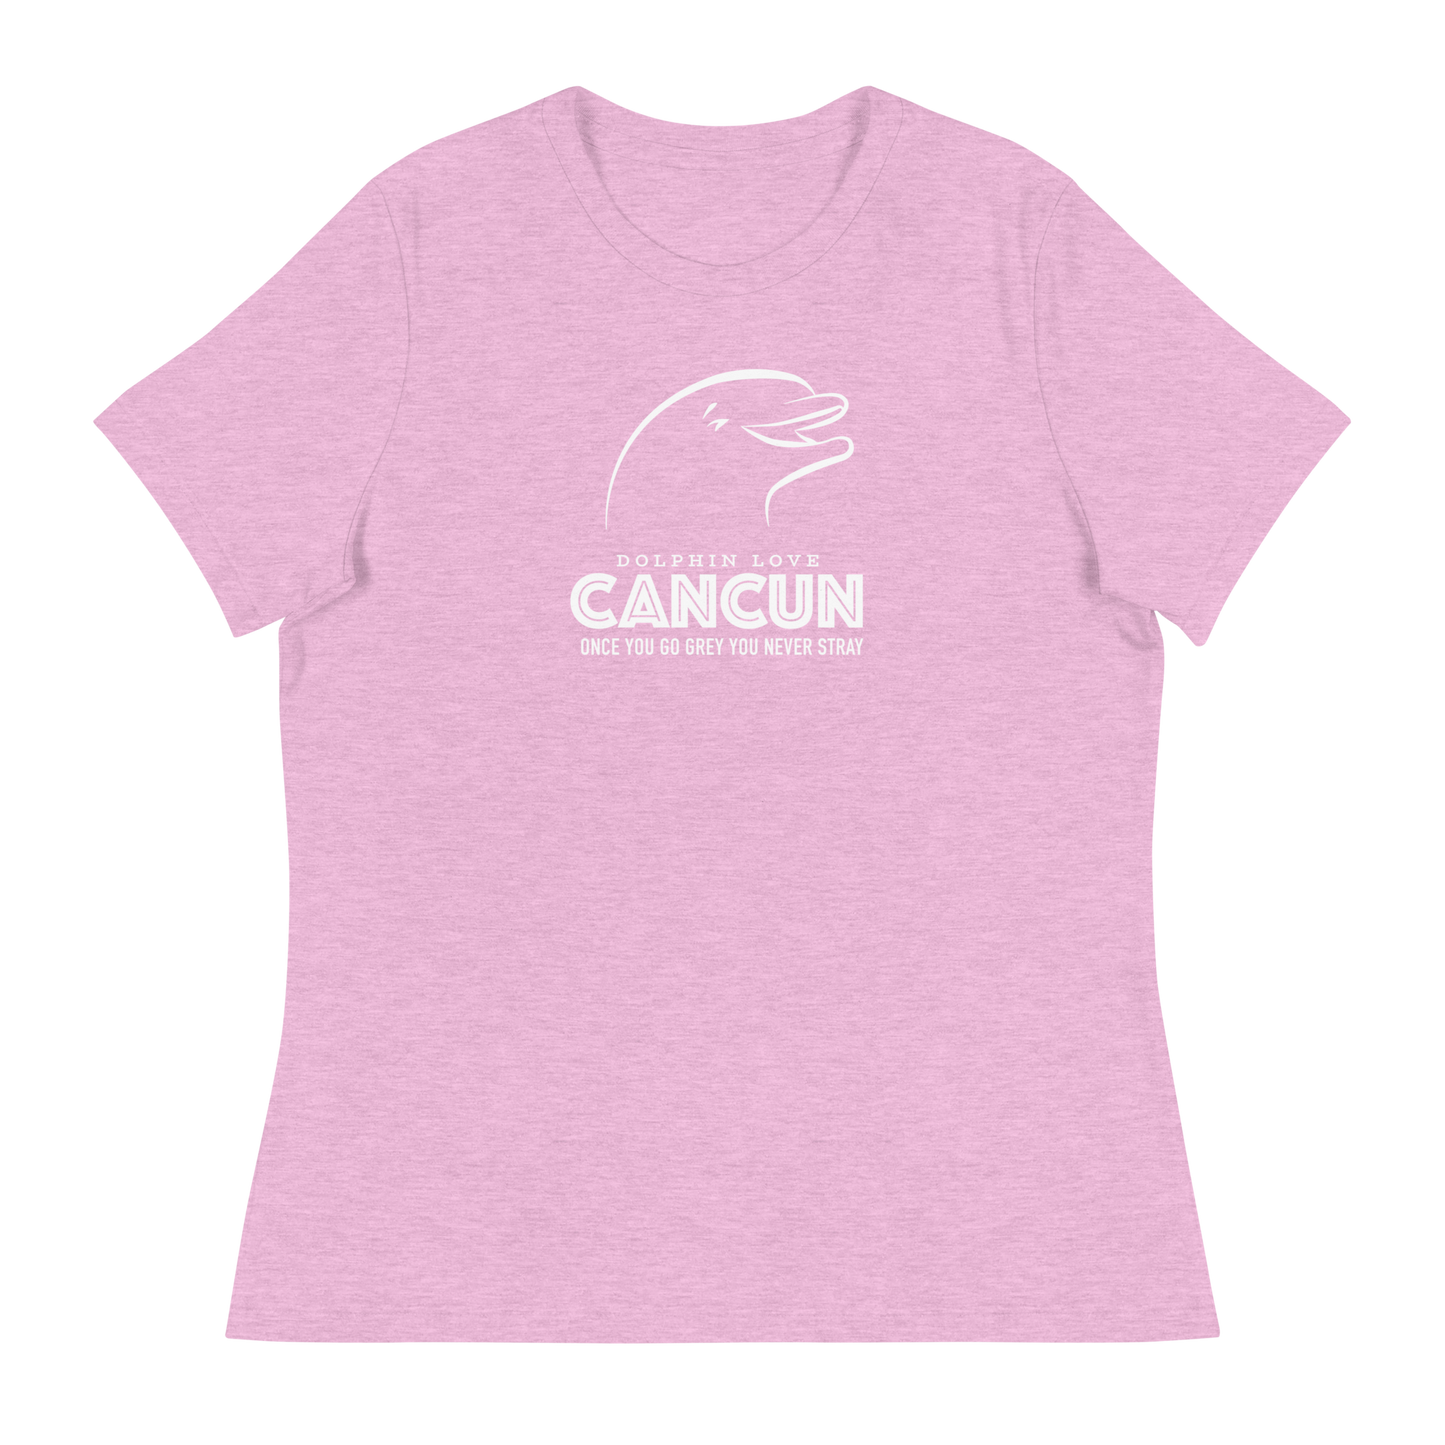 Women's - CANCUN - Once you go grey you never stray Dolphin - Funny T-Shirt